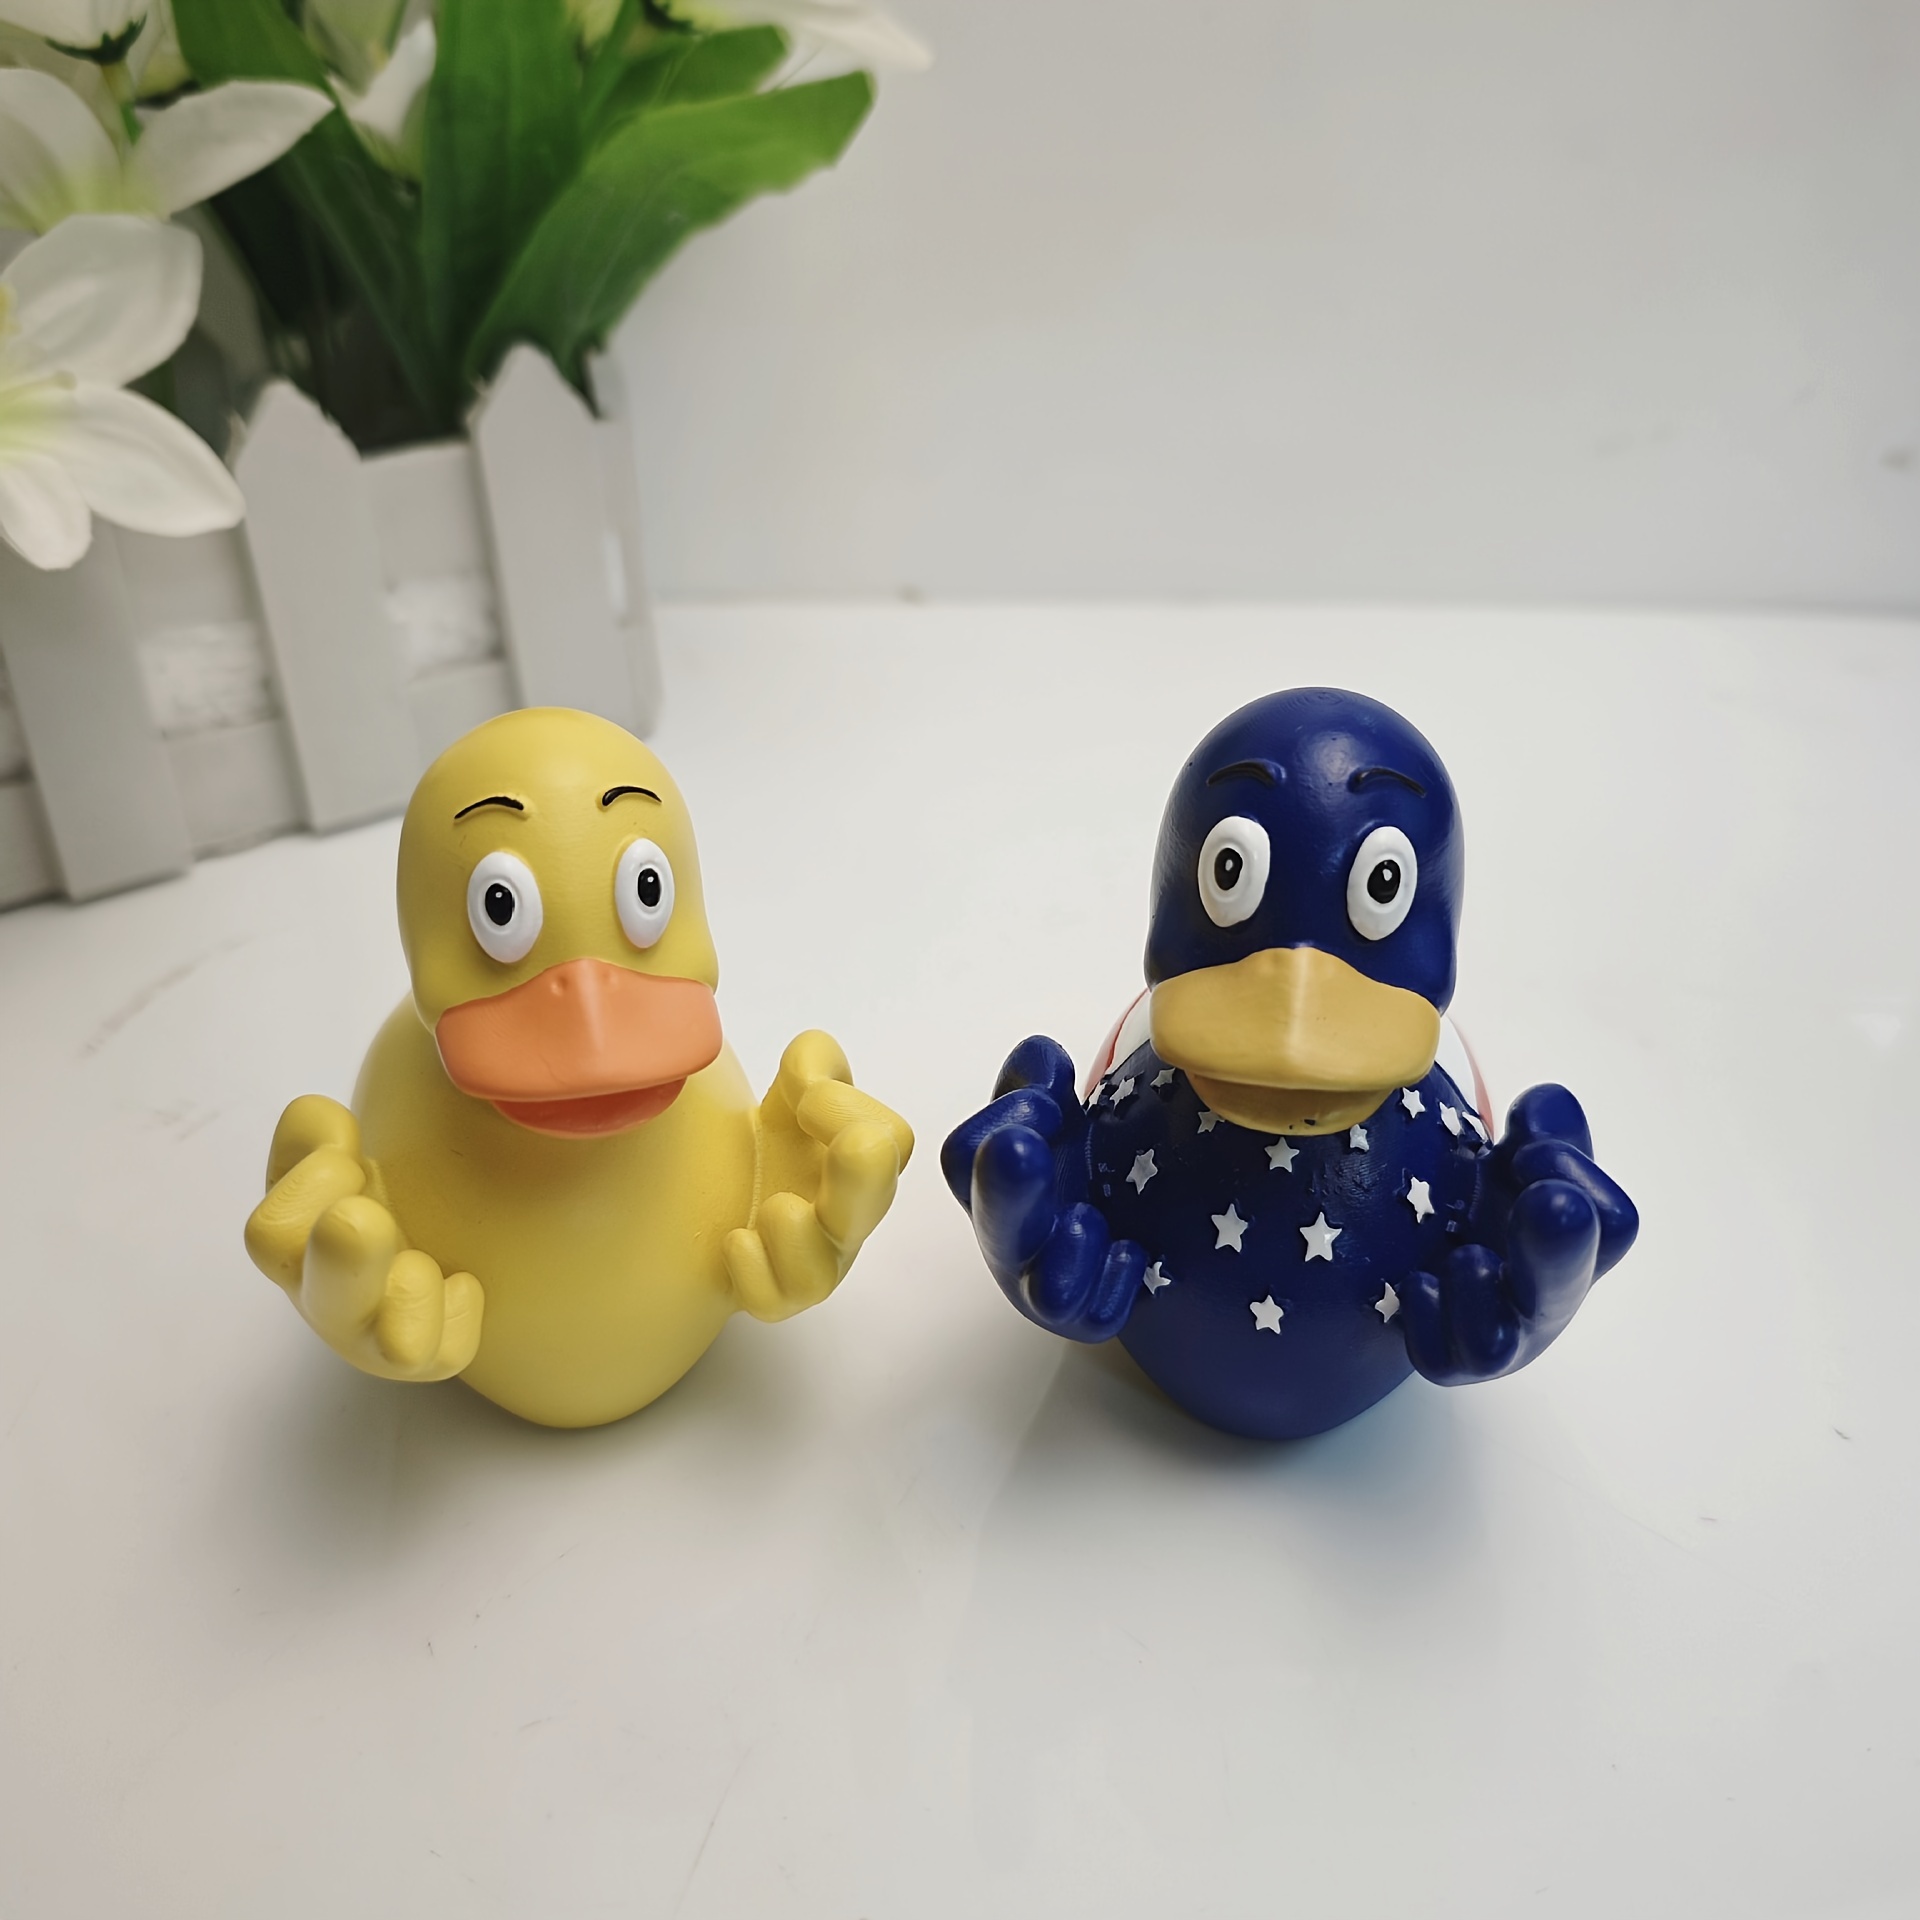 

Patriotic Saluting Duck Decoration - Yellow & Blue, American Flag Finger Design, Perfect For Jeep Dashboard Or Garden Display, Durable Resin, No Battery Needed